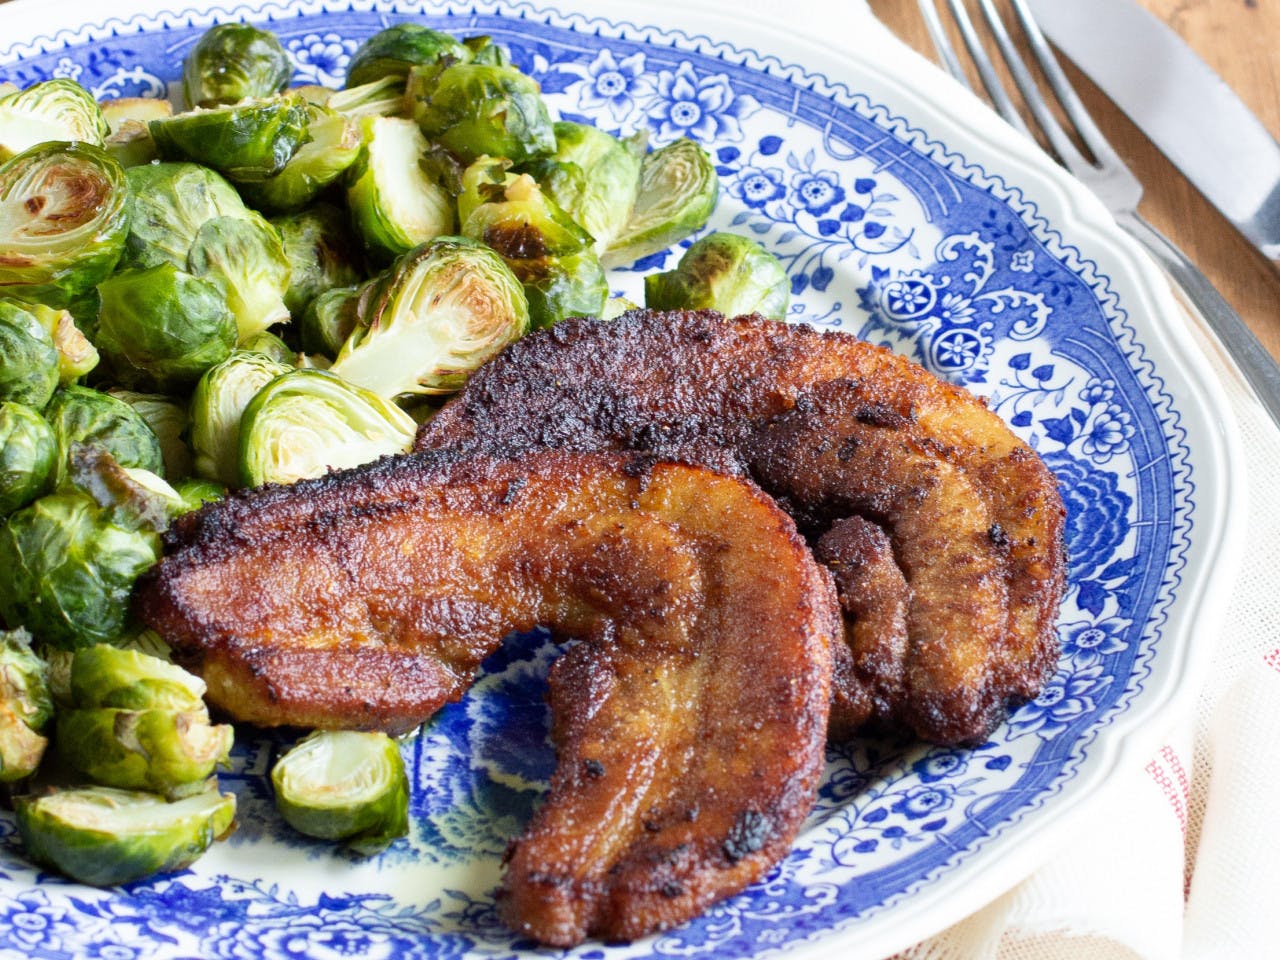 Brussels sprouts with spicy pork belly